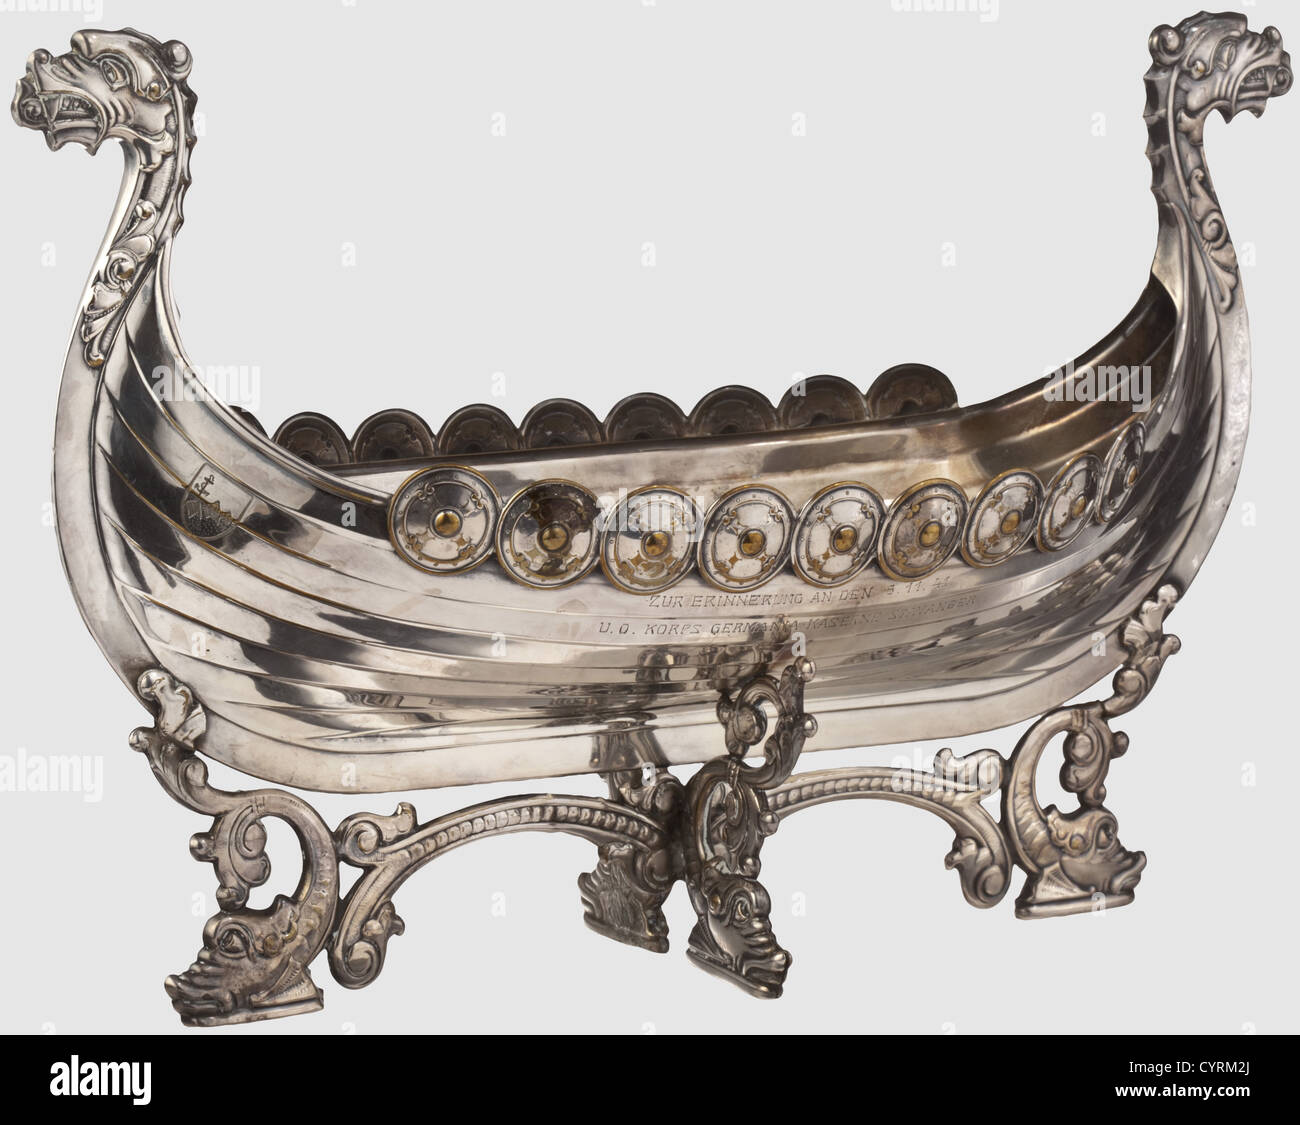 A commemoration gift from naval defense Stavanger,dated 5 November 1941 Silver-plated Viking ship with characteristical dragon's heads and side-mounted shields,one side with engraved inscription 'Zur Erinnerung an den 5.11.41 - U.O.Korps Germania-Kaserne Stavanger'(In memory of 5th November 1941 - NCOs of Gemania-barracks Stavanger).Cruciform base with dolphins,maker's mark and serial number '846'.Length 35.5 cm,height 22.8 cm.The commanding officer of naval defense Stavanger was not only in command of a flotilla but also of art,Additional-Rights-Clearences-Not Available Stock Photo